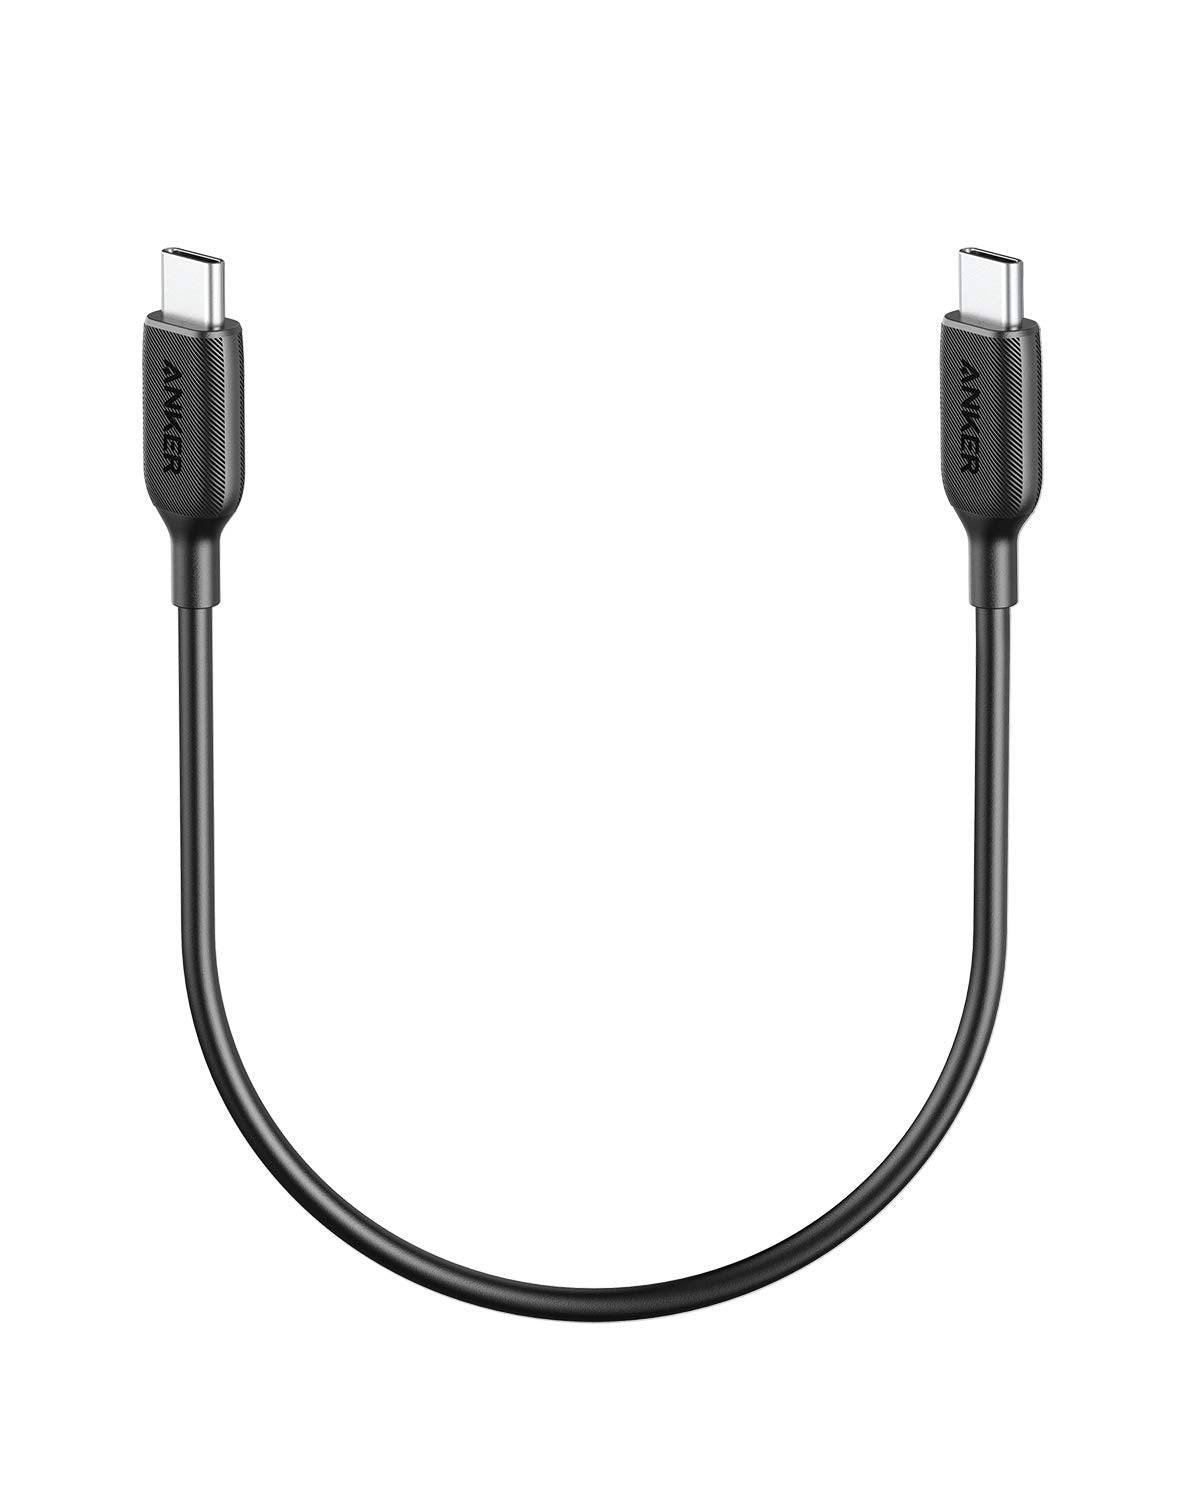 Anker 541 USB-C to USB-C Cable